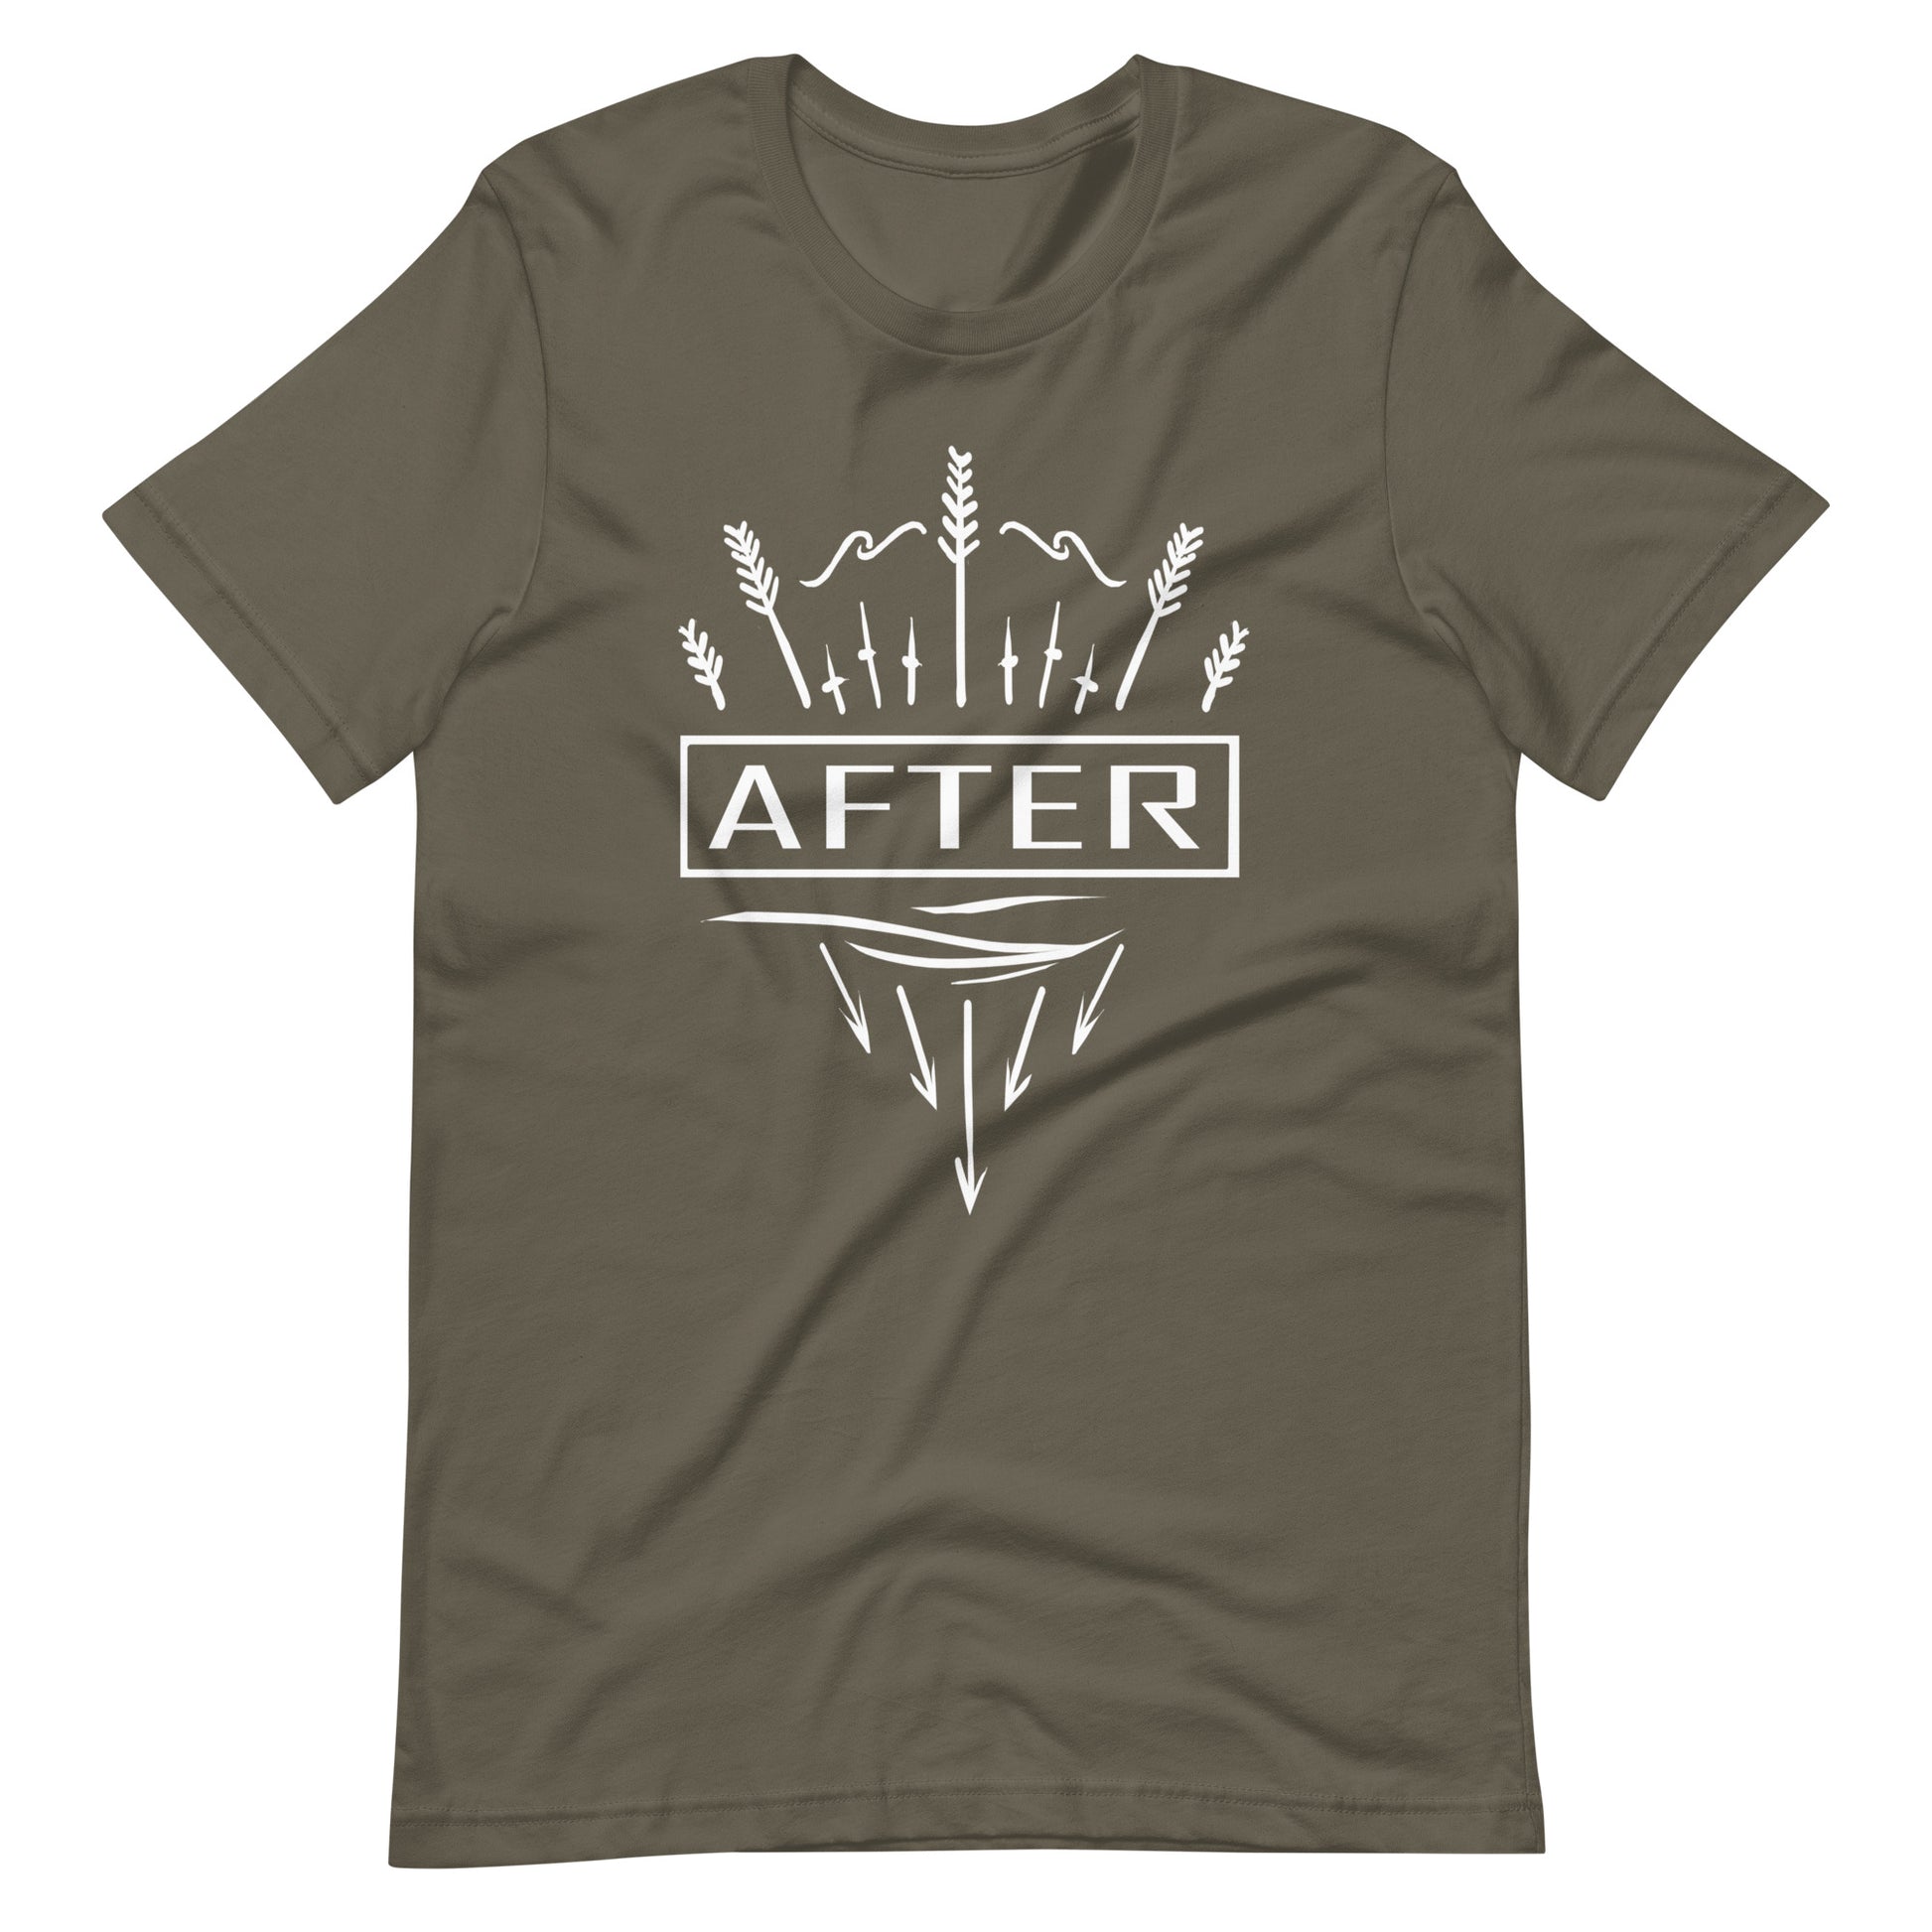 After - Men's t-shirt - Army Front